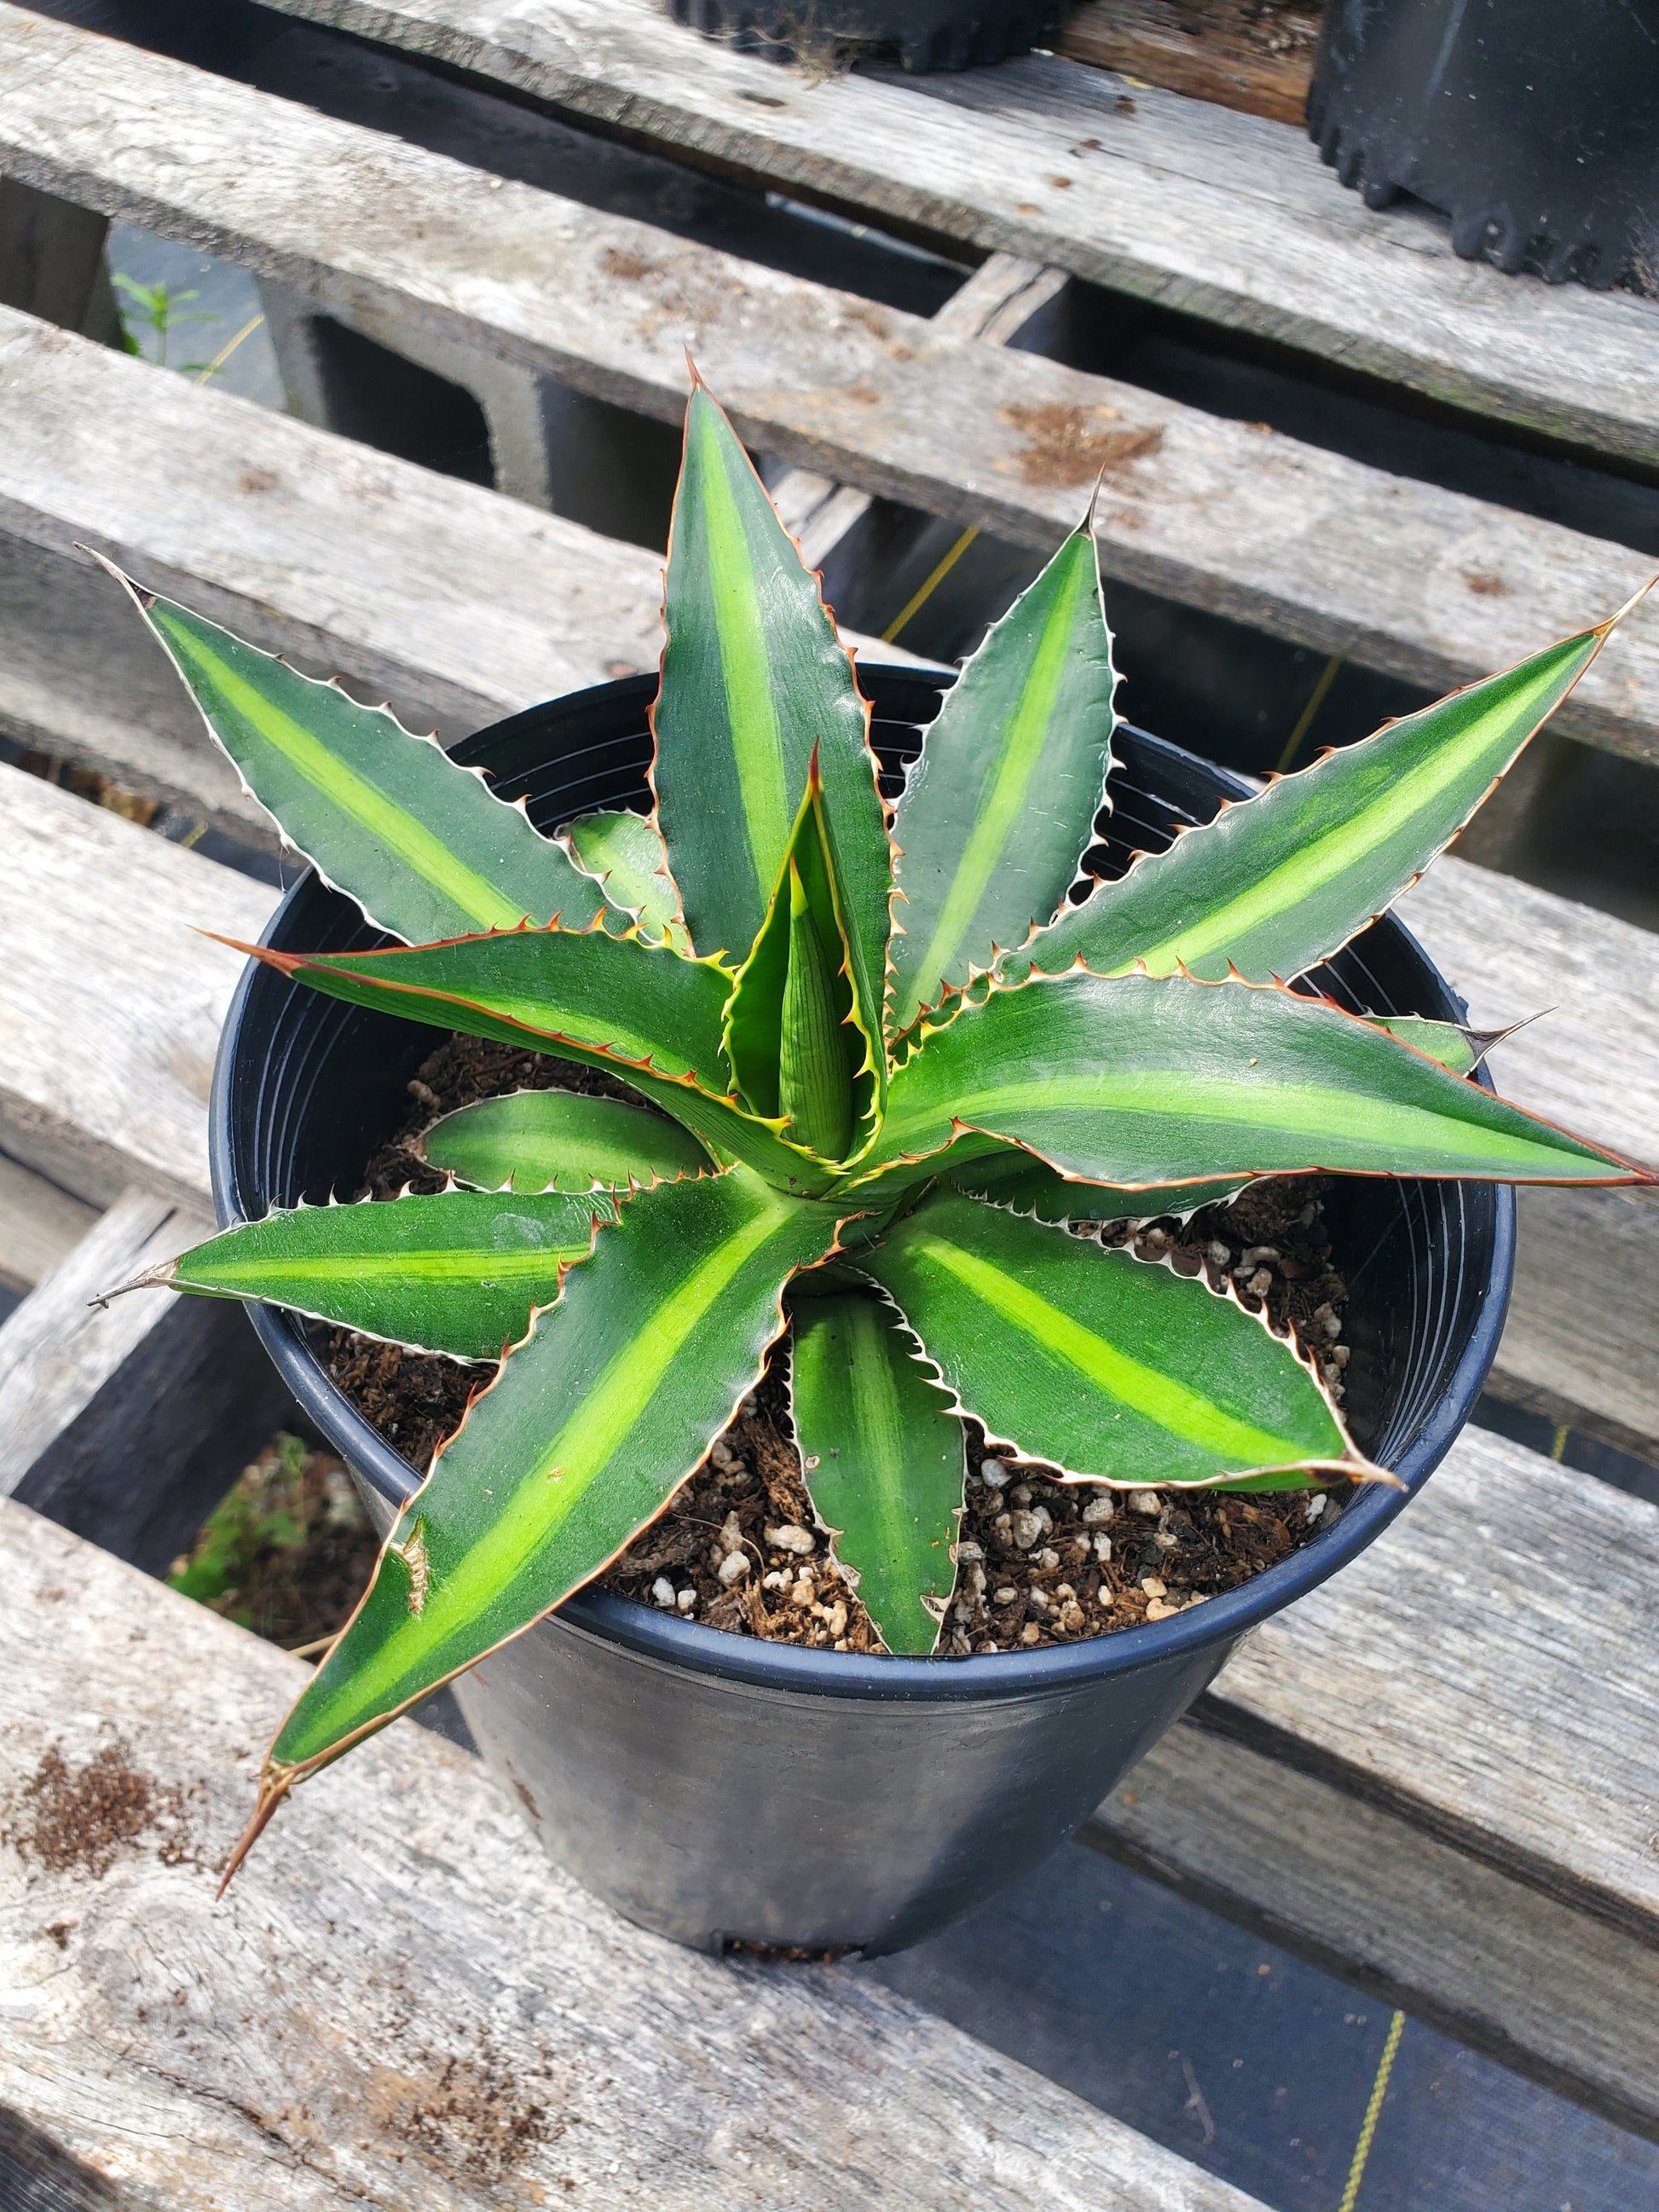 Top down view of young agave plant with yellow, and green stripes and red spines